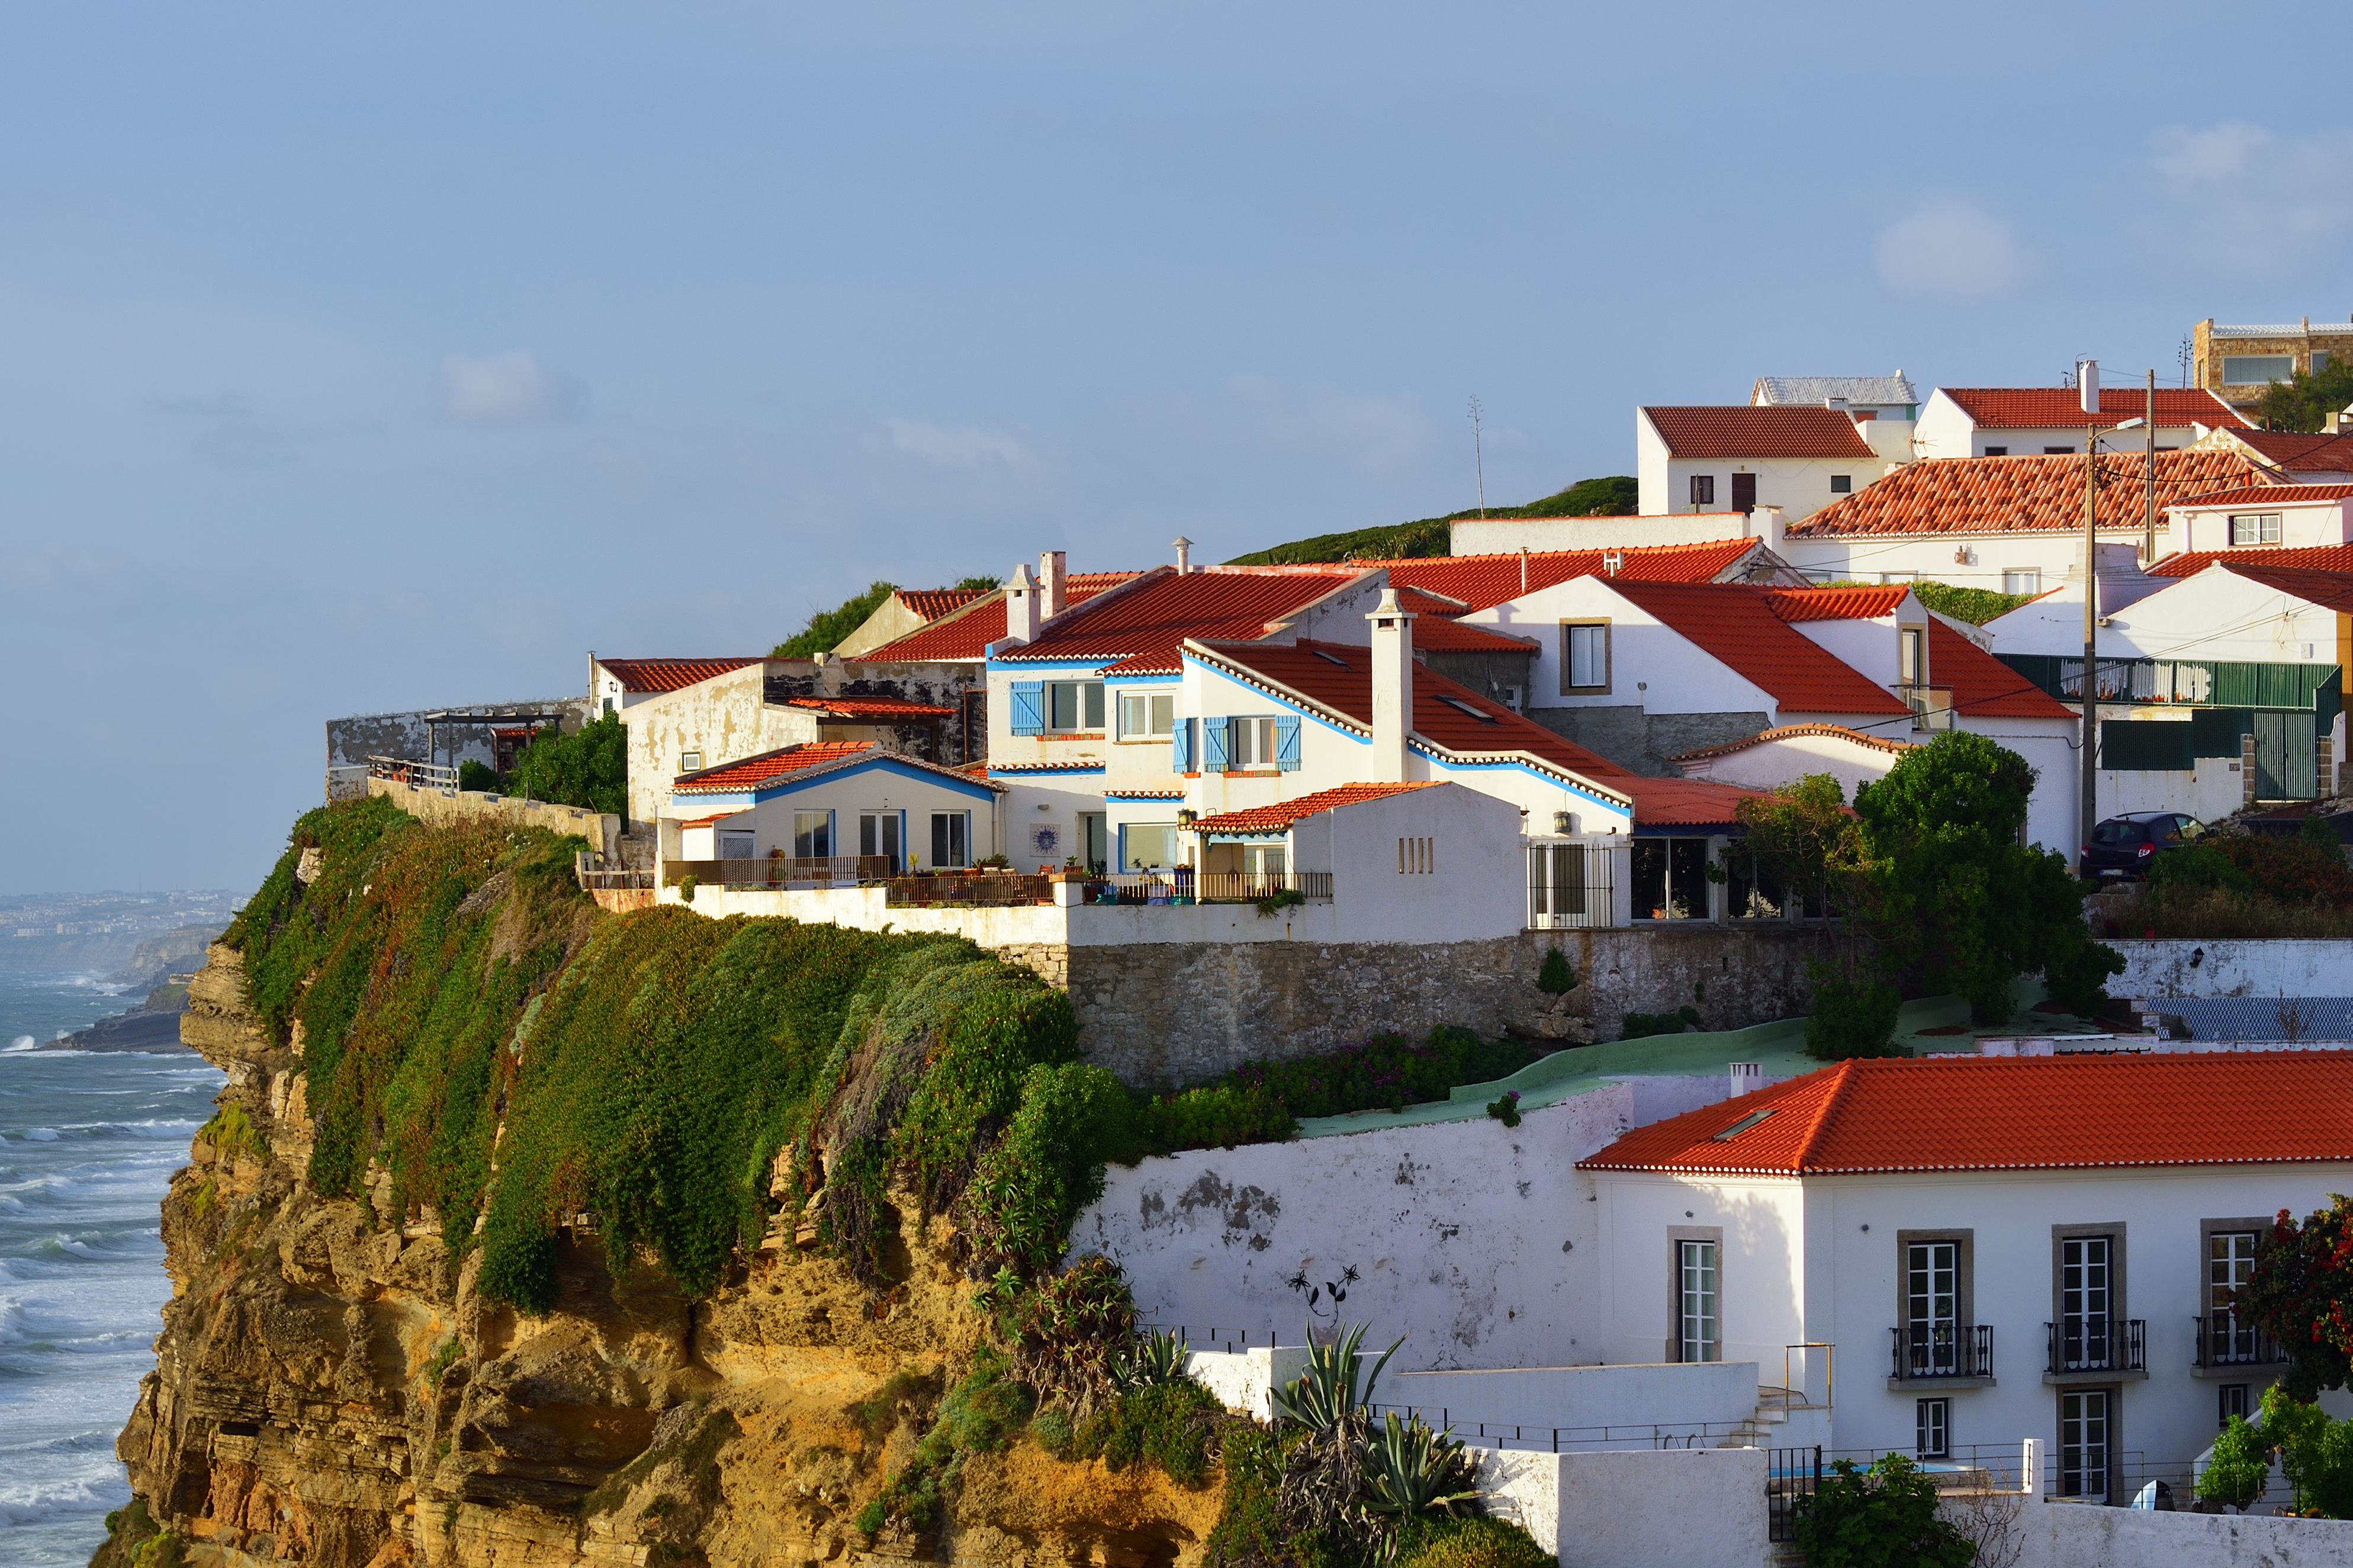 Real estate on the coast as a way for Russians to immigrate to Portugal